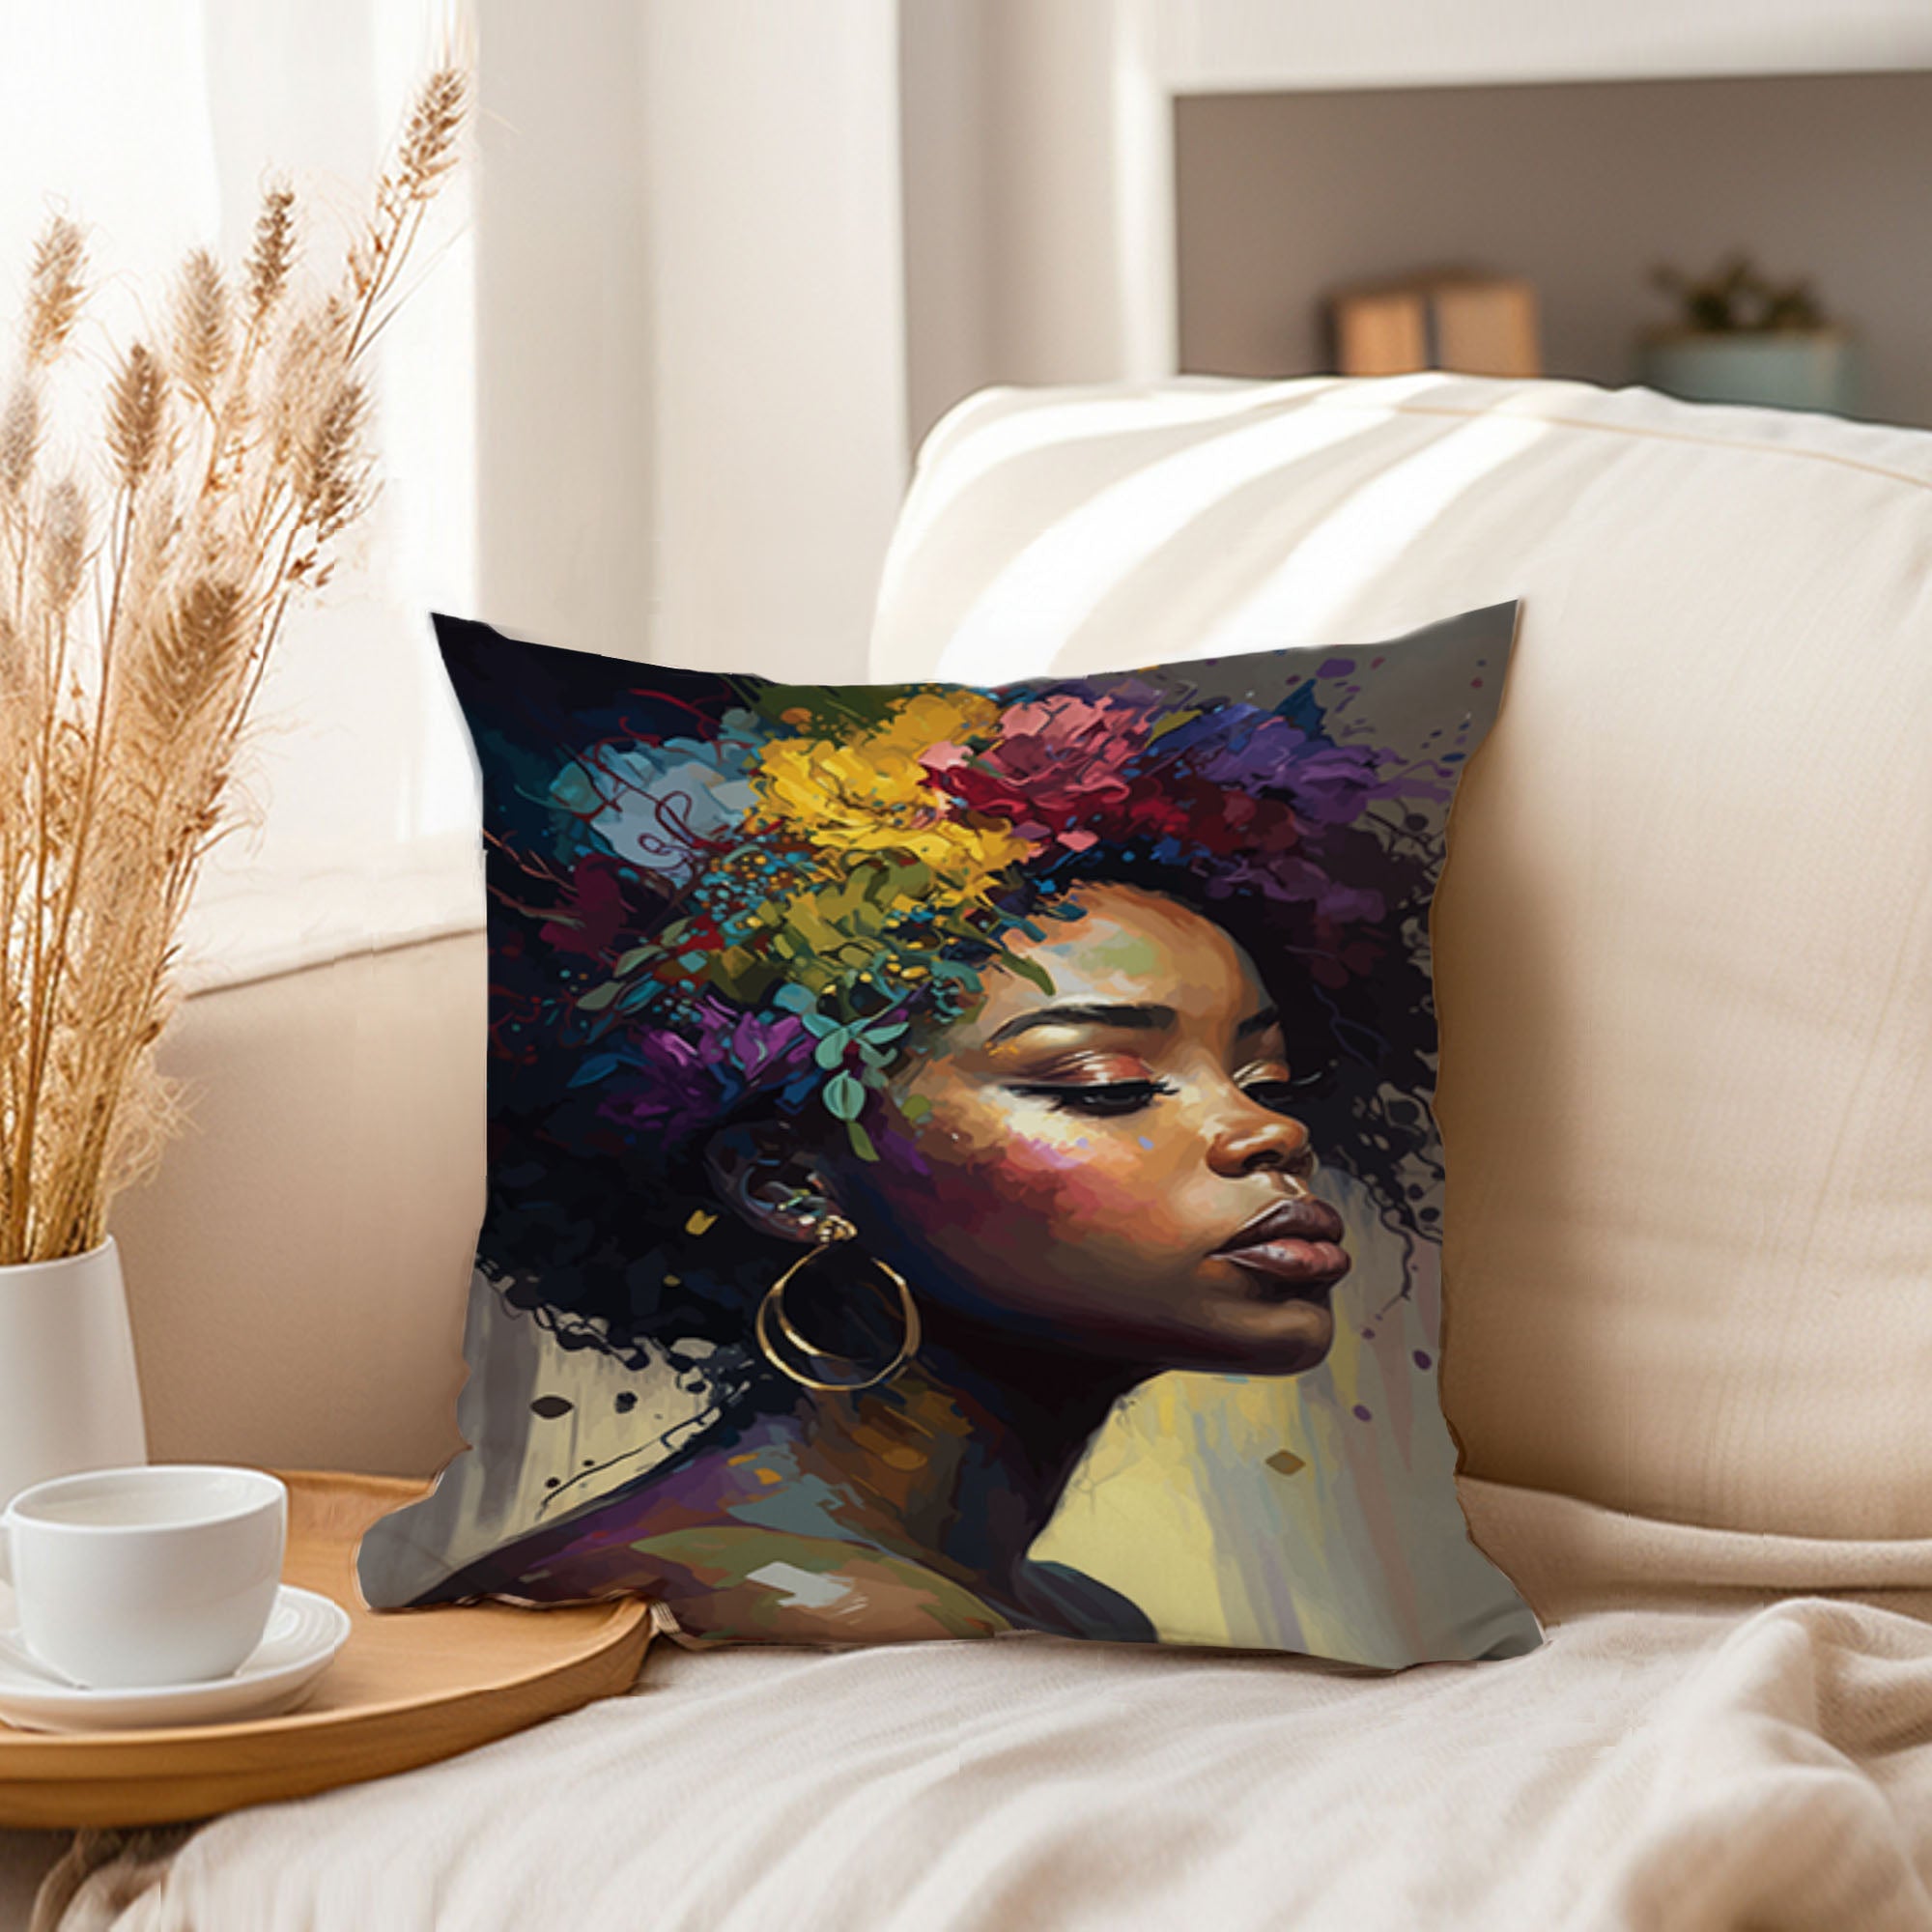 Ethan Taylor People & Portraits Throw Pillow Soft Cushion Cover 'Black Woman Portrait, African American Art Female Portraits' Modern Decorative Square Accent Pillow Case, 16x16 Inches, Brown, Green - image 3 of 5